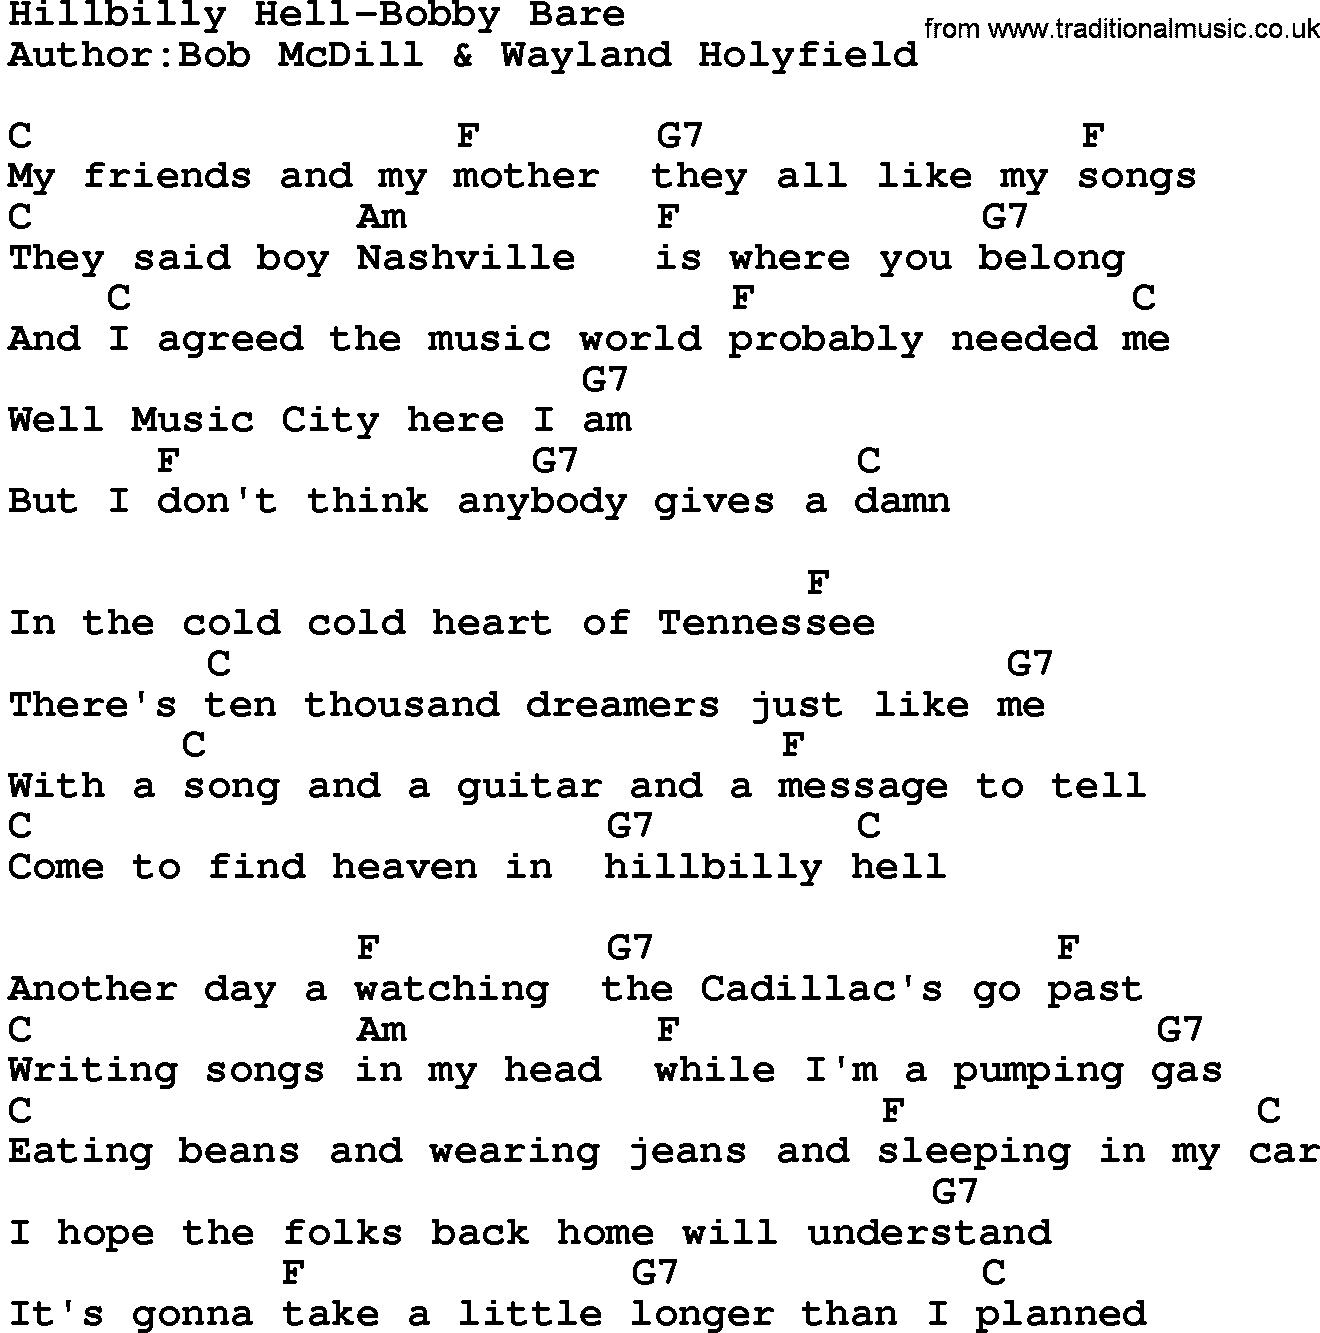 Country music song: Hillbilly Hell-Bobby Bare lyrics and chords